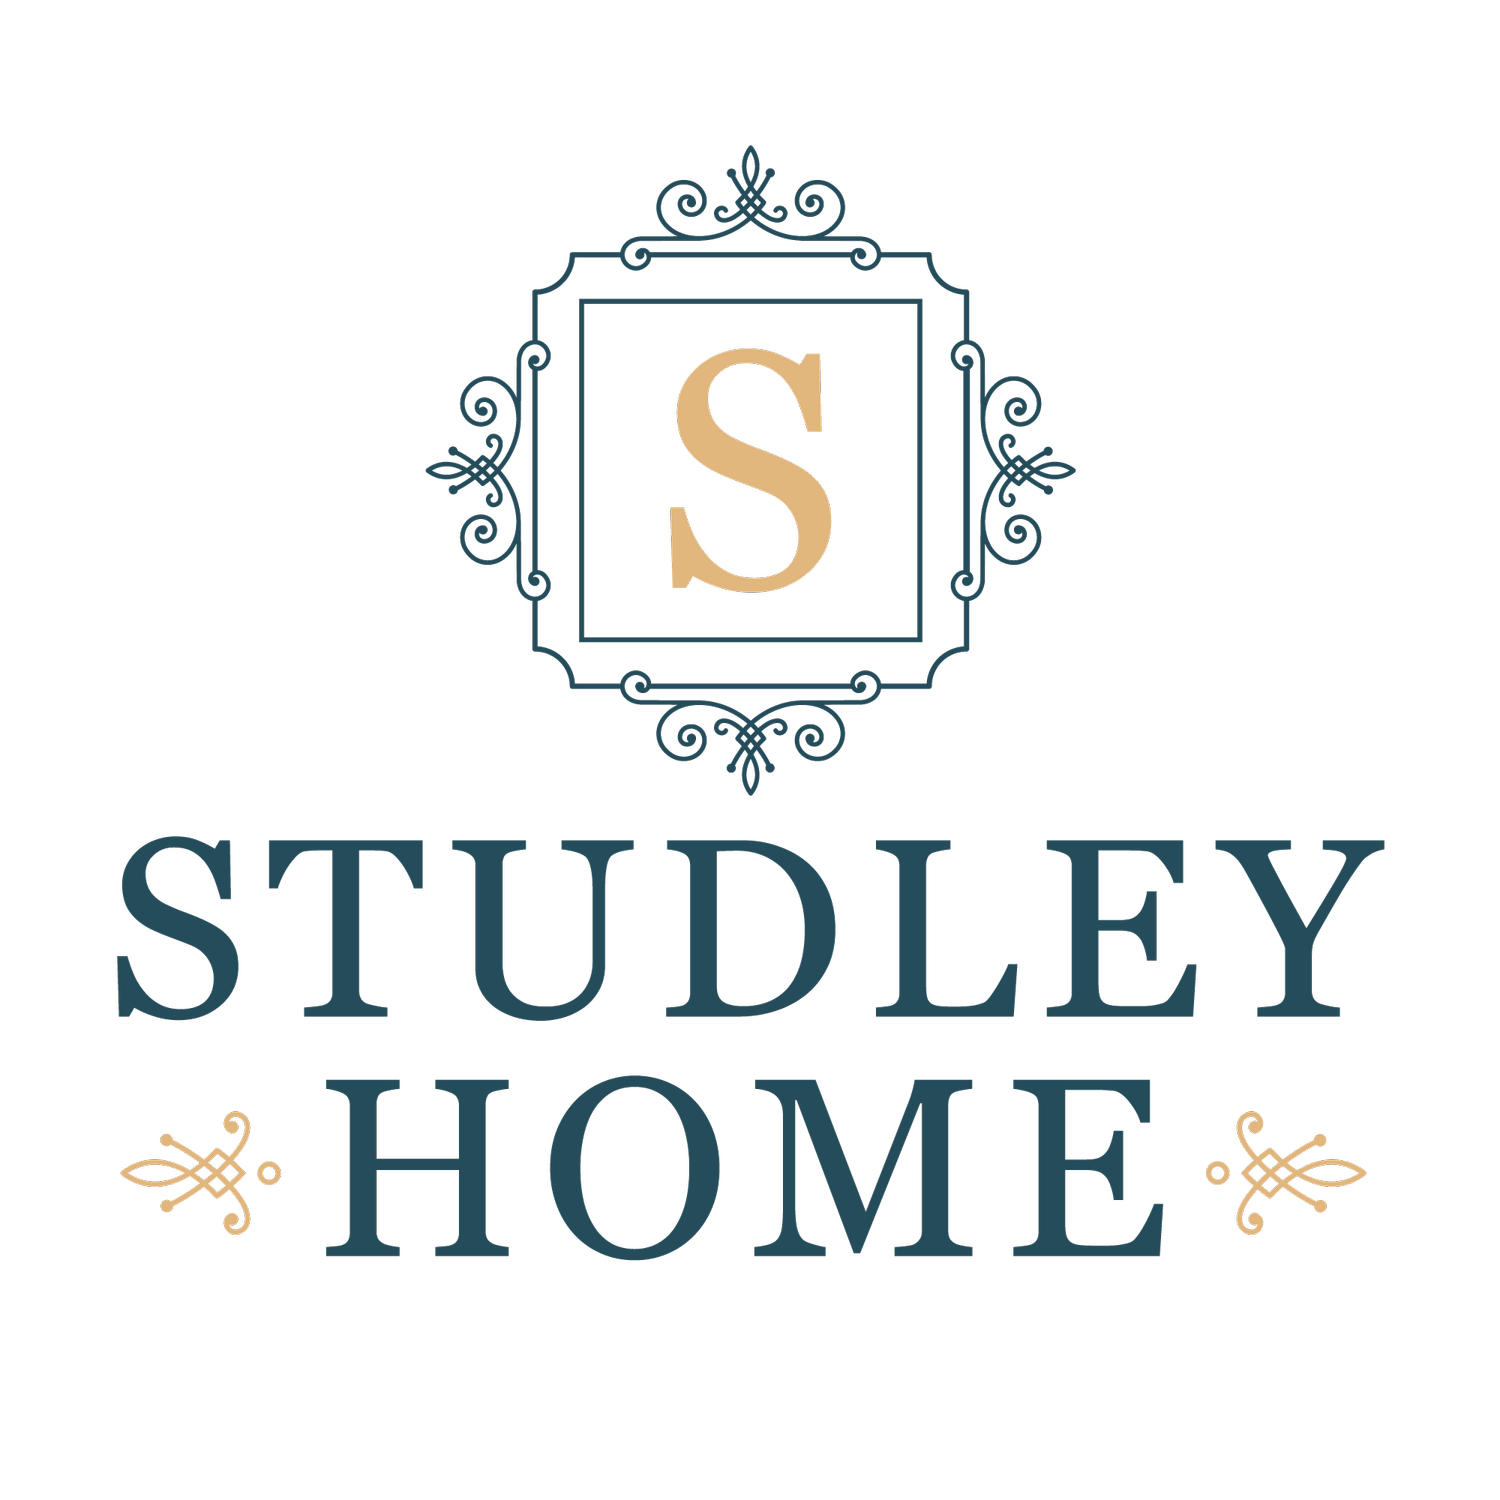 Studley Home